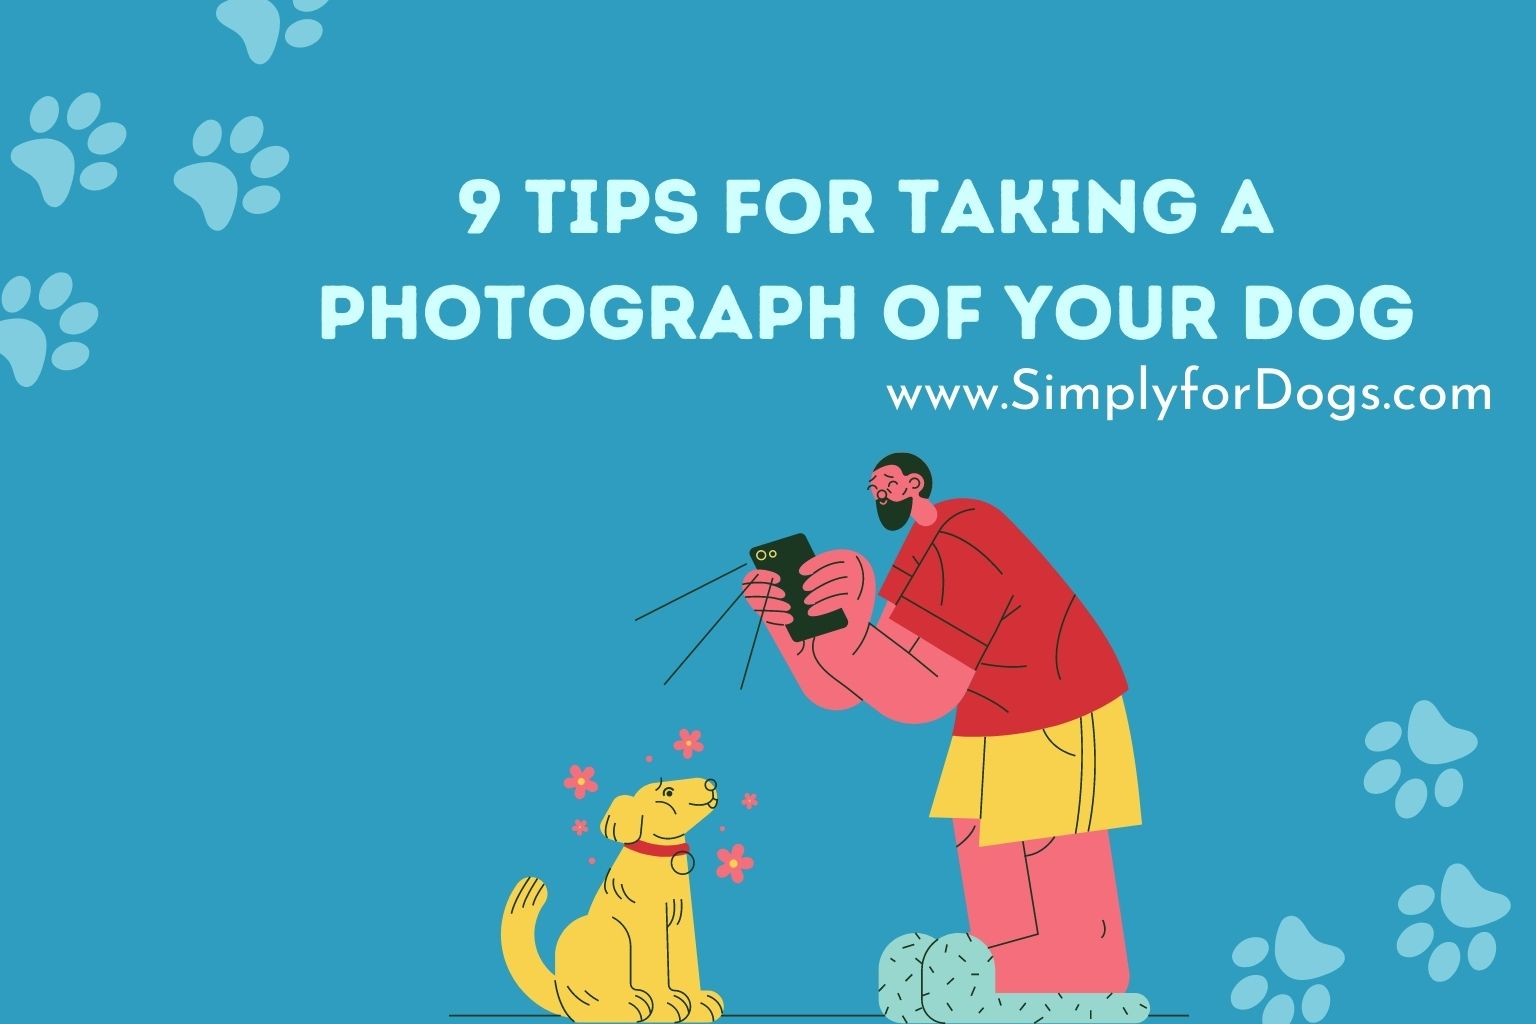 9 Tips for Taking a Photograph of Your Dog